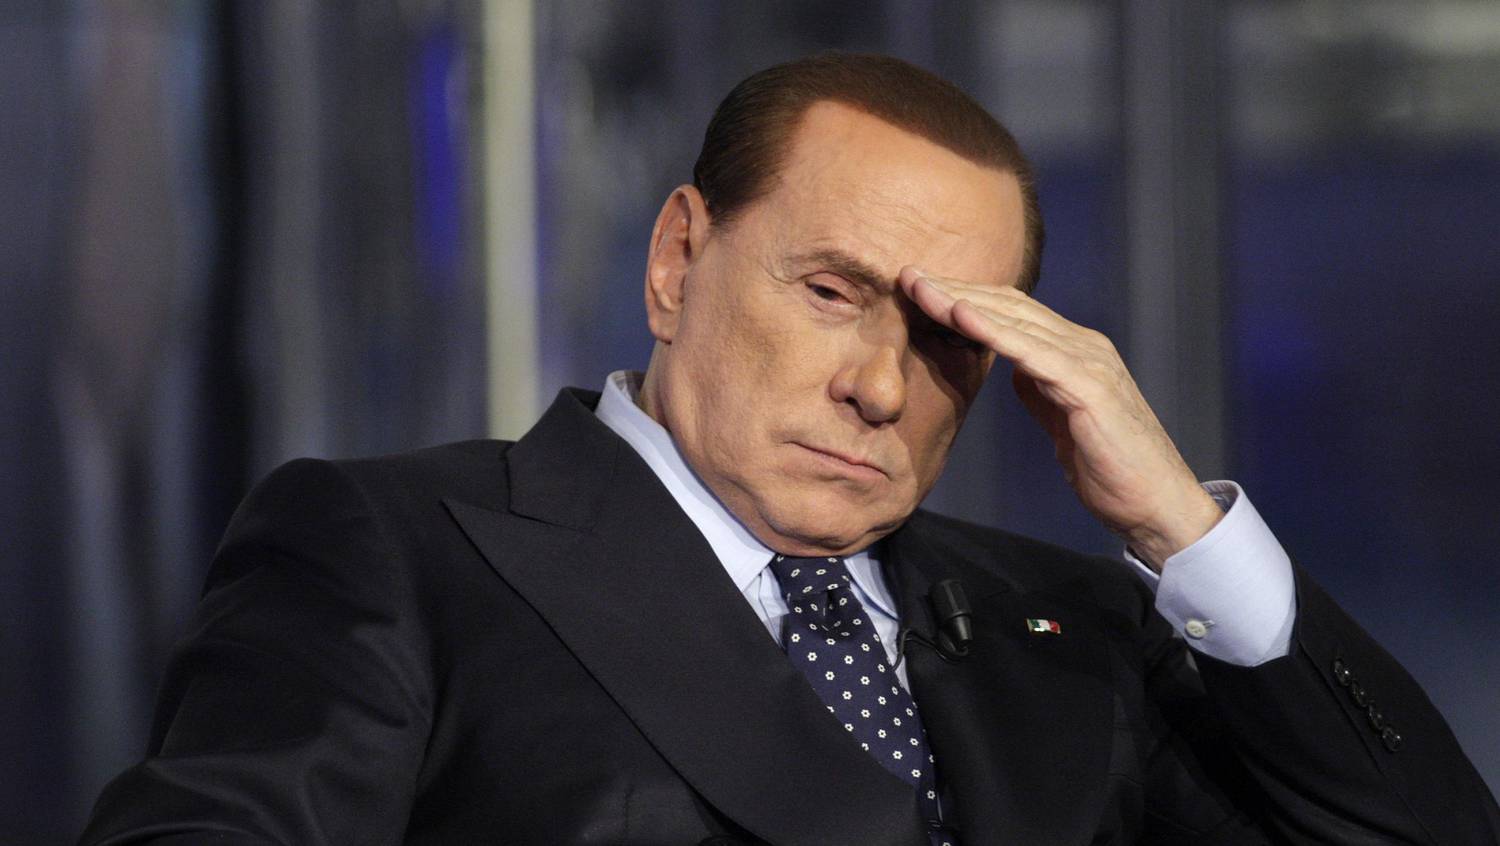 Index - Abroad - Silvio Berlusconi has been hospitalized, but claims he is fine